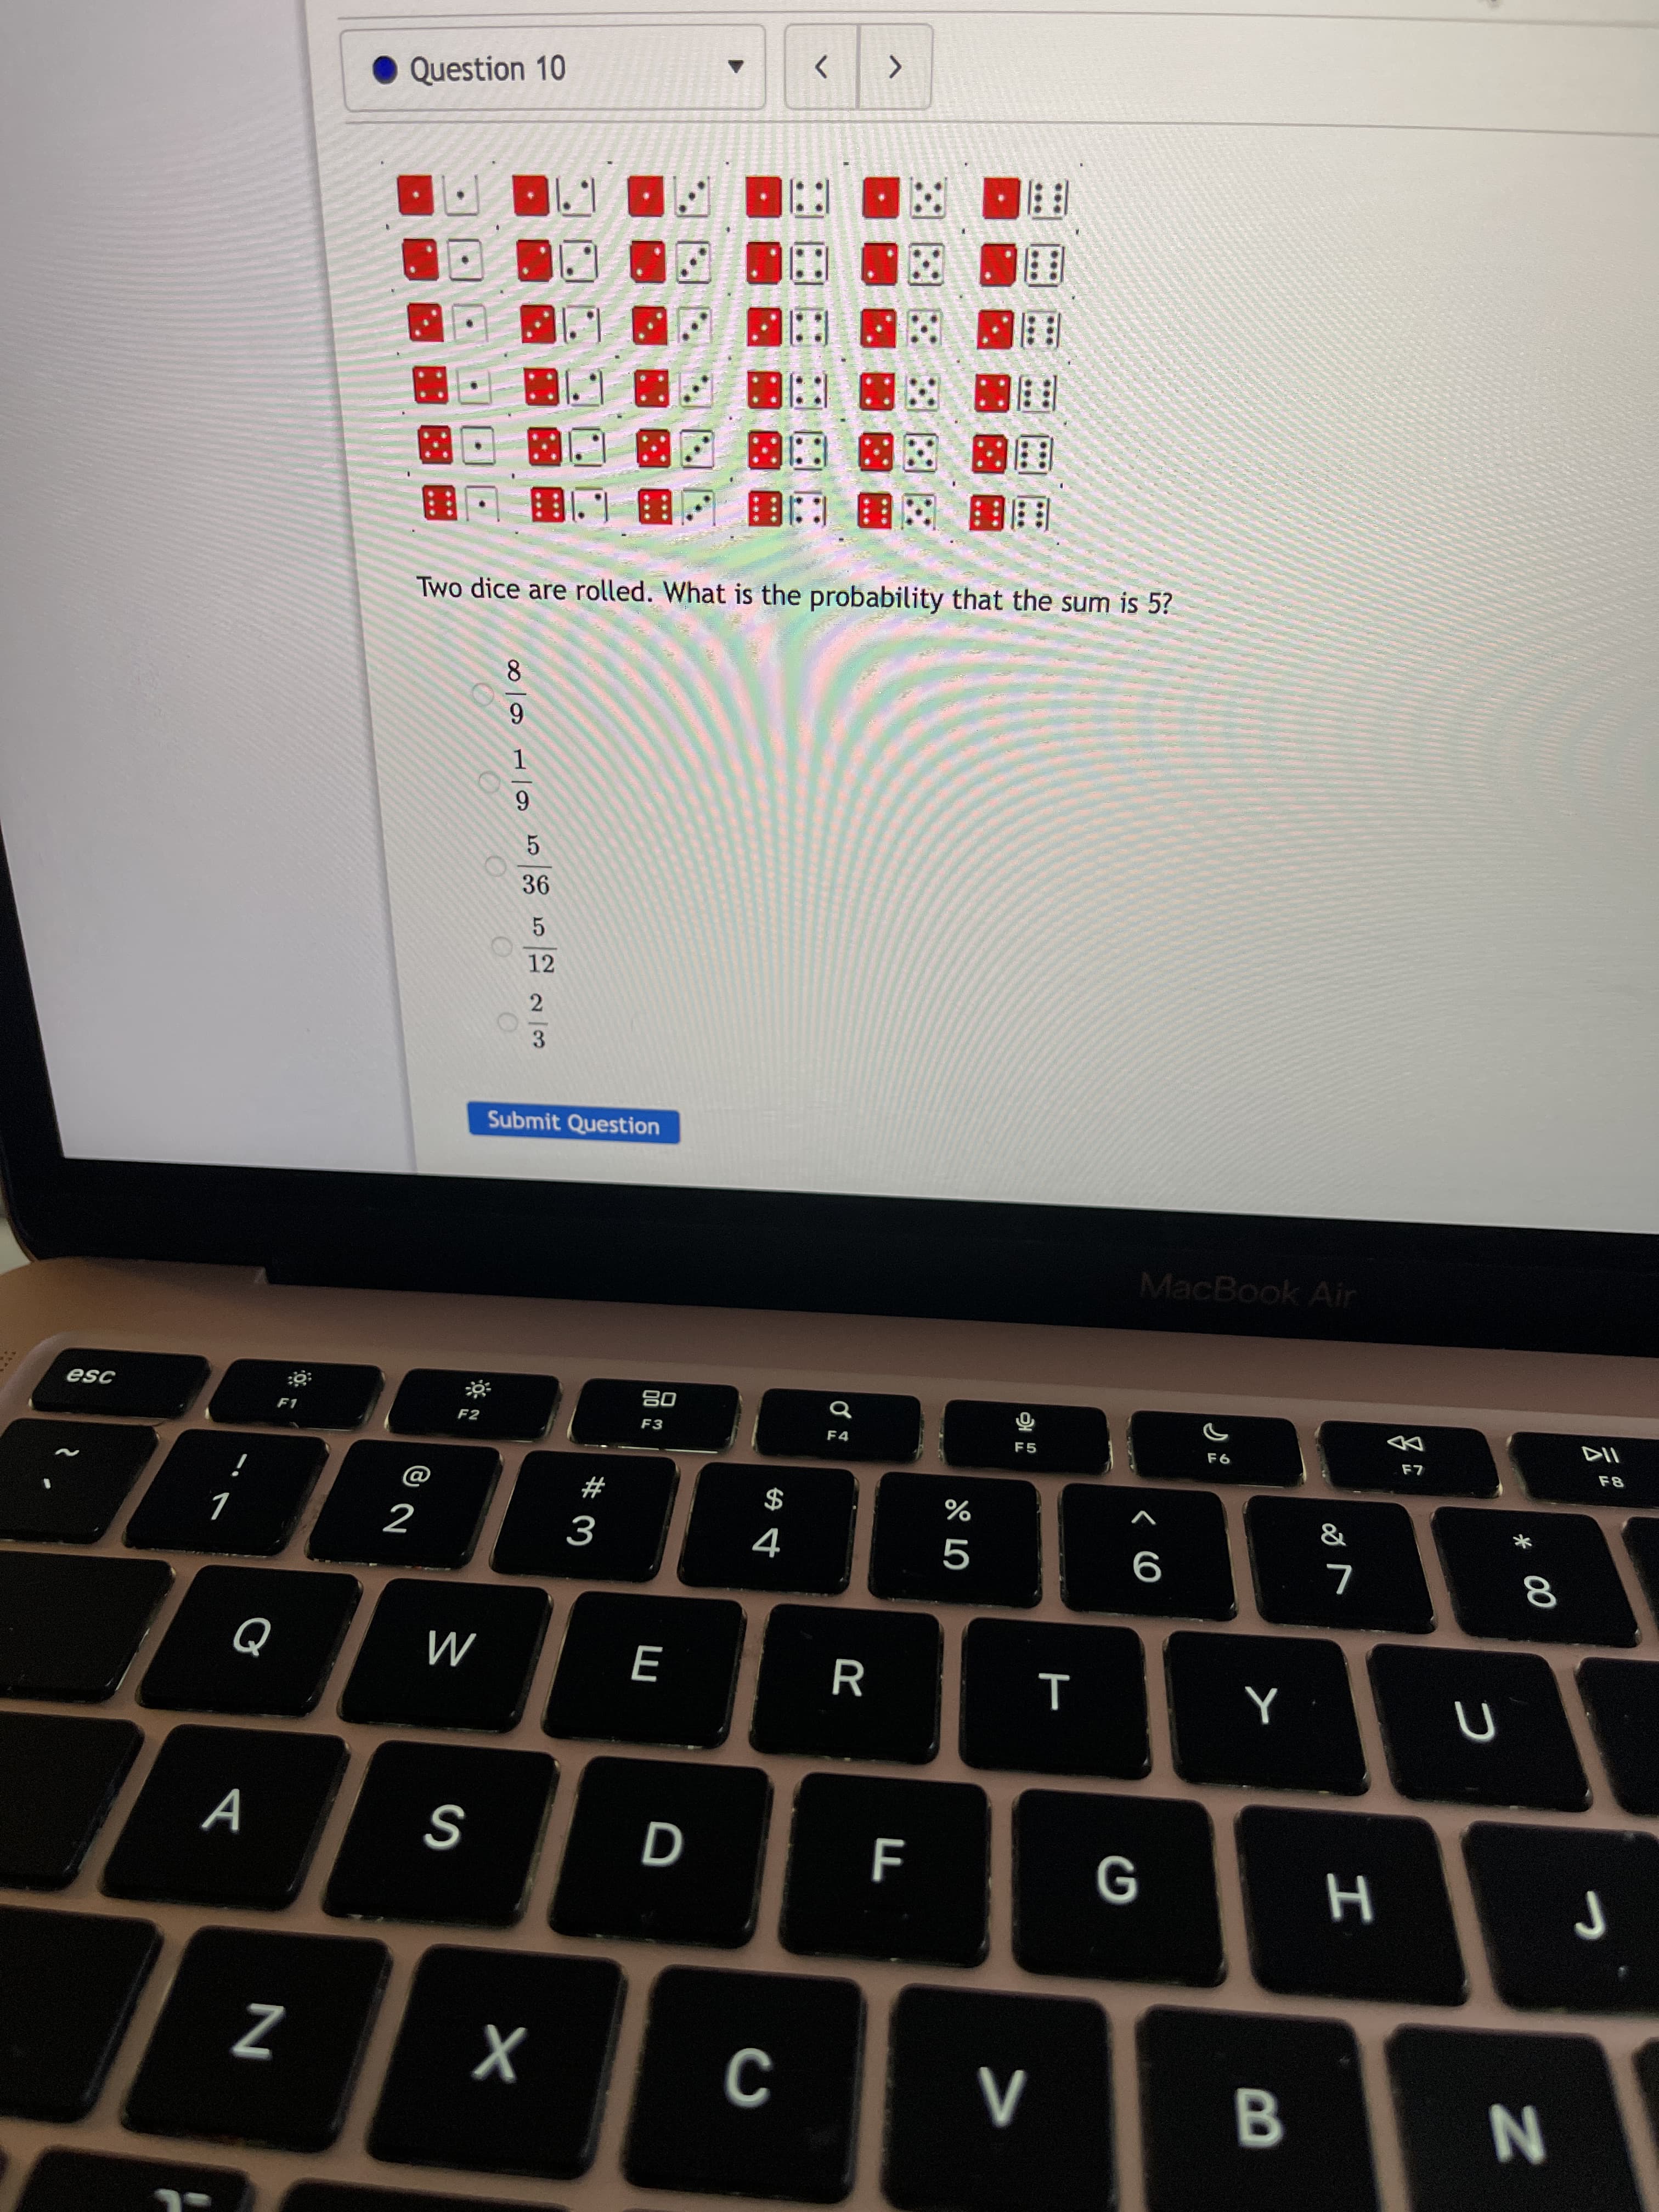 * 00
D
Z
G
S
A
M
9
$
DD
2
F3
08
F2
F1
MacBook Air
Submit Question
3
12
5.
5.
6.
6.
8.
Two dice are rolled. What is the probability that the sum is 5?
国国 国:图
图
国图 图 图回图
自 : 回J8
国 困
国 :
<>
Question 10
